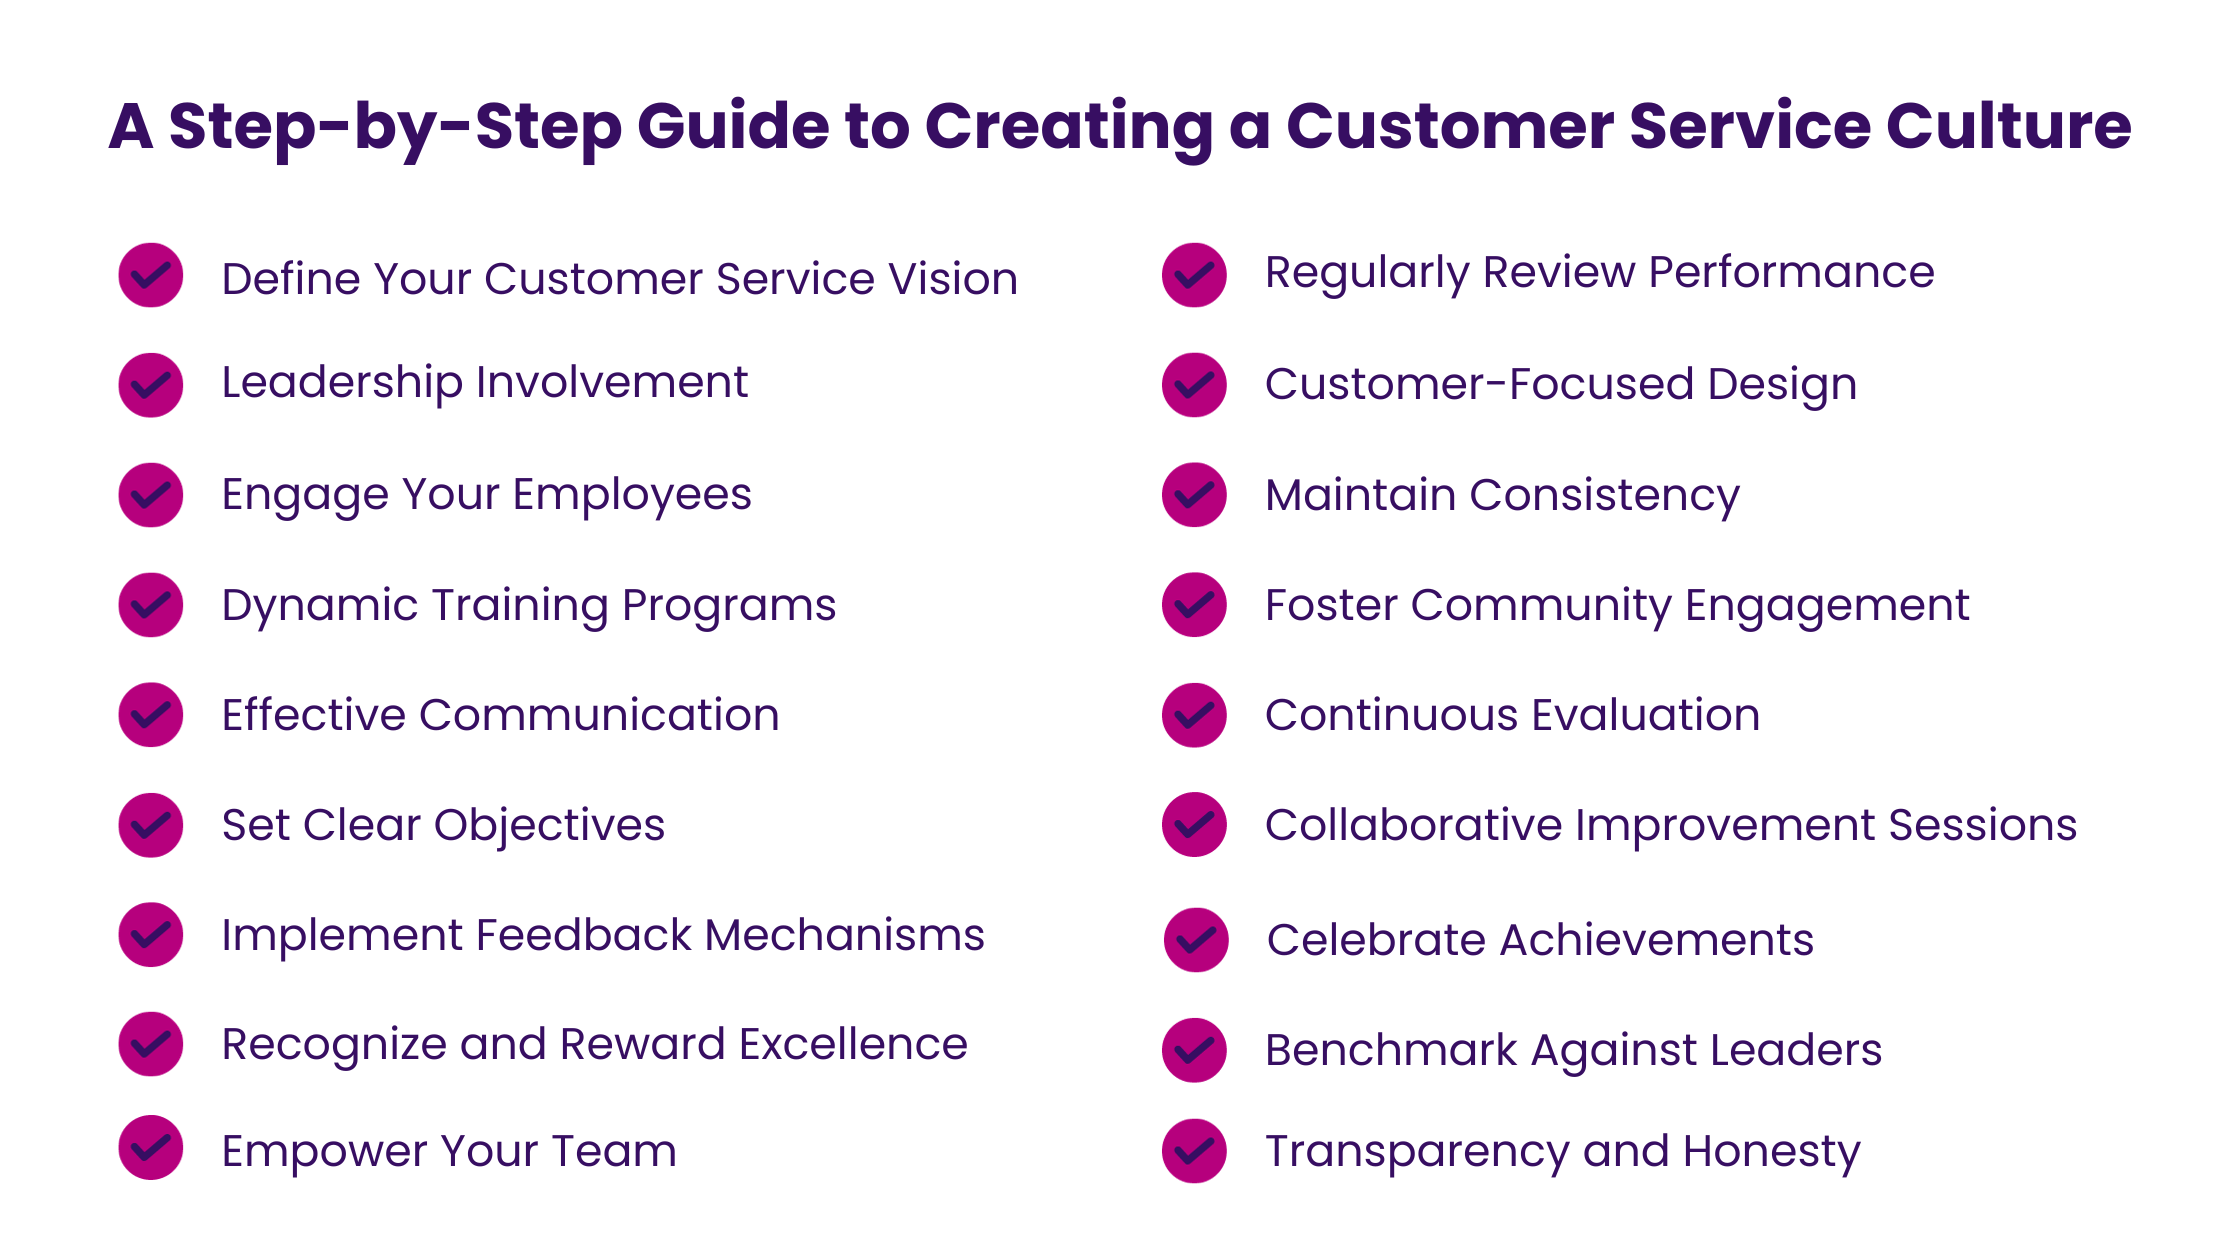 A Step-by-Step Guide to Creating a Customer Service Culture